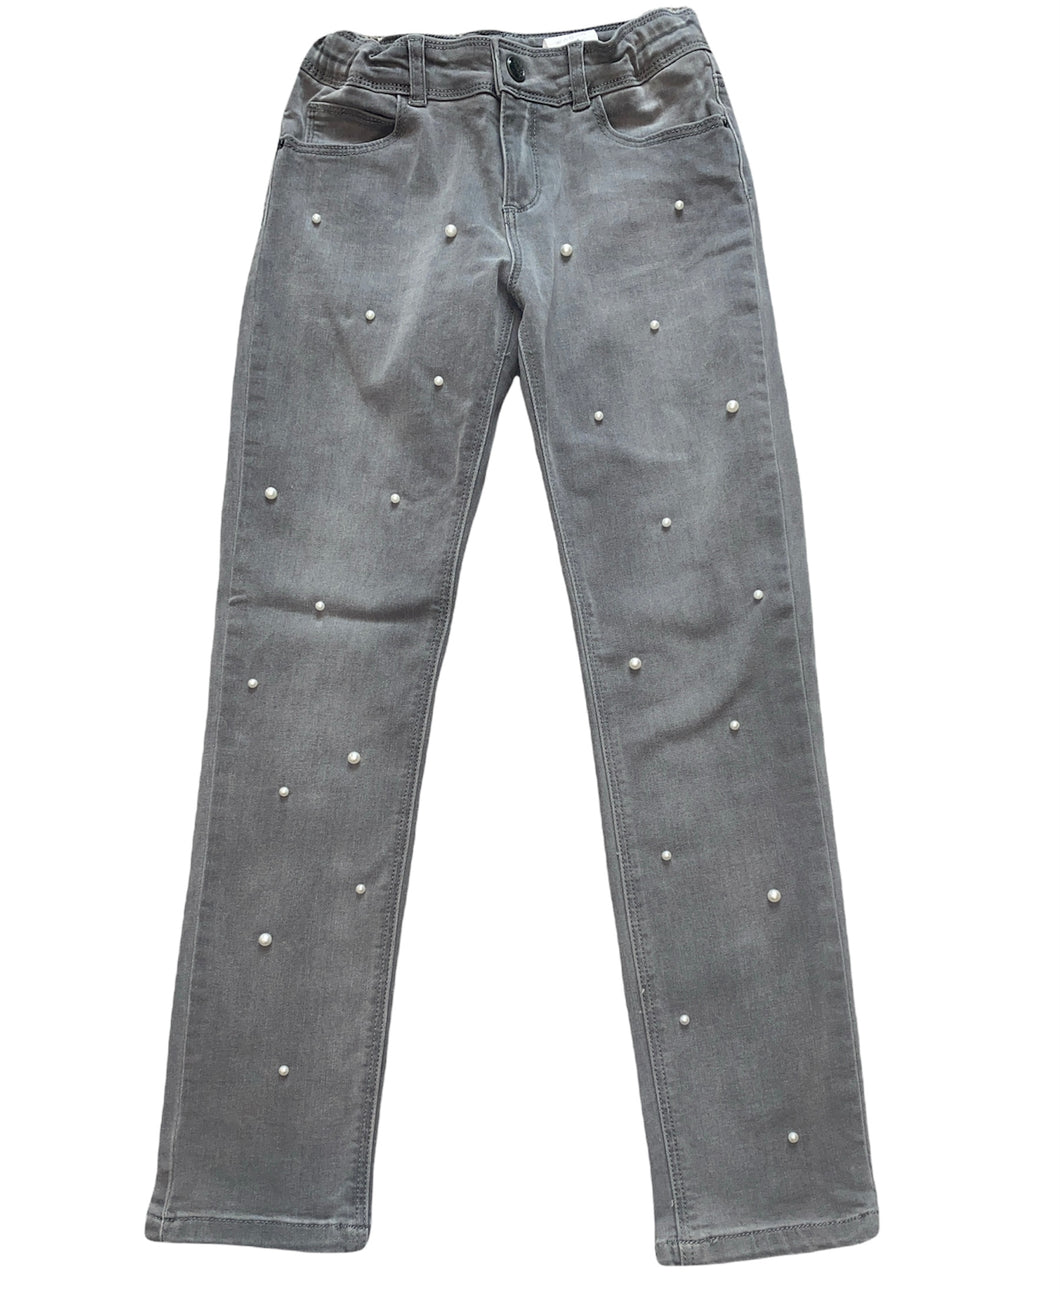 Ikks girls skinny fit gray jeans with pearl embellishments 10